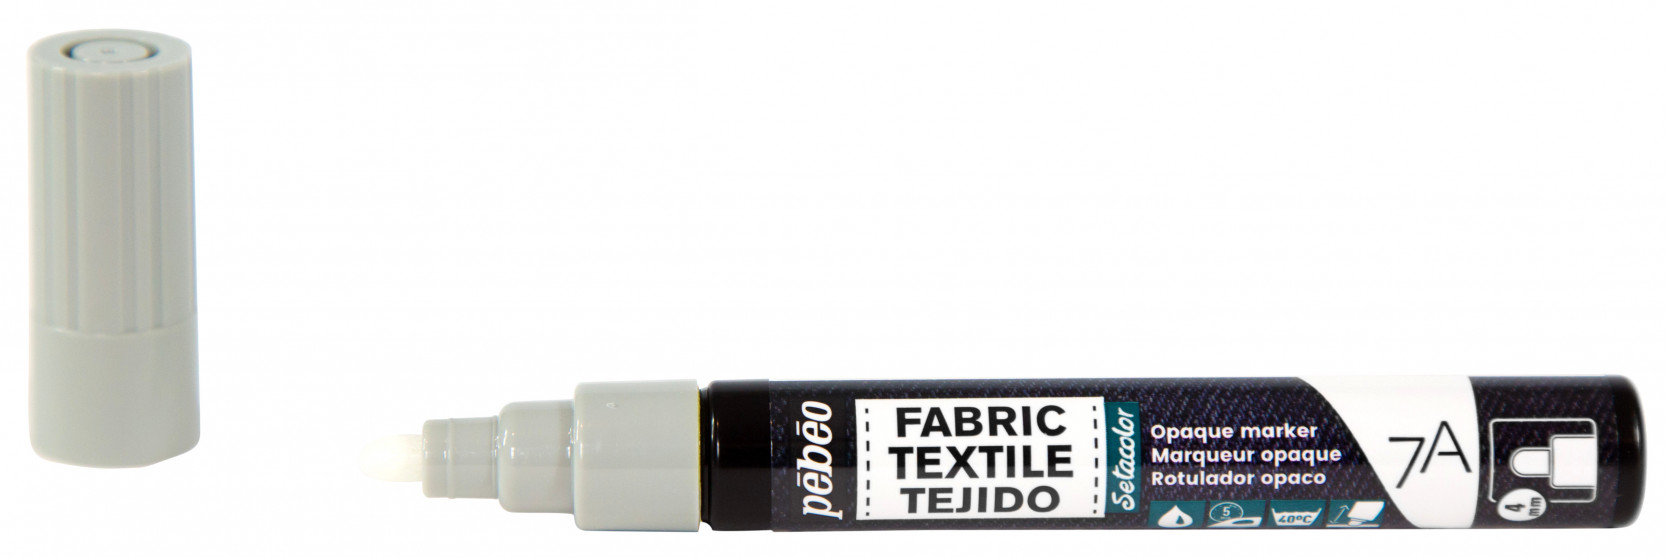 7A Opaque Marker 4 Mm Round Nib Pastel Taupe